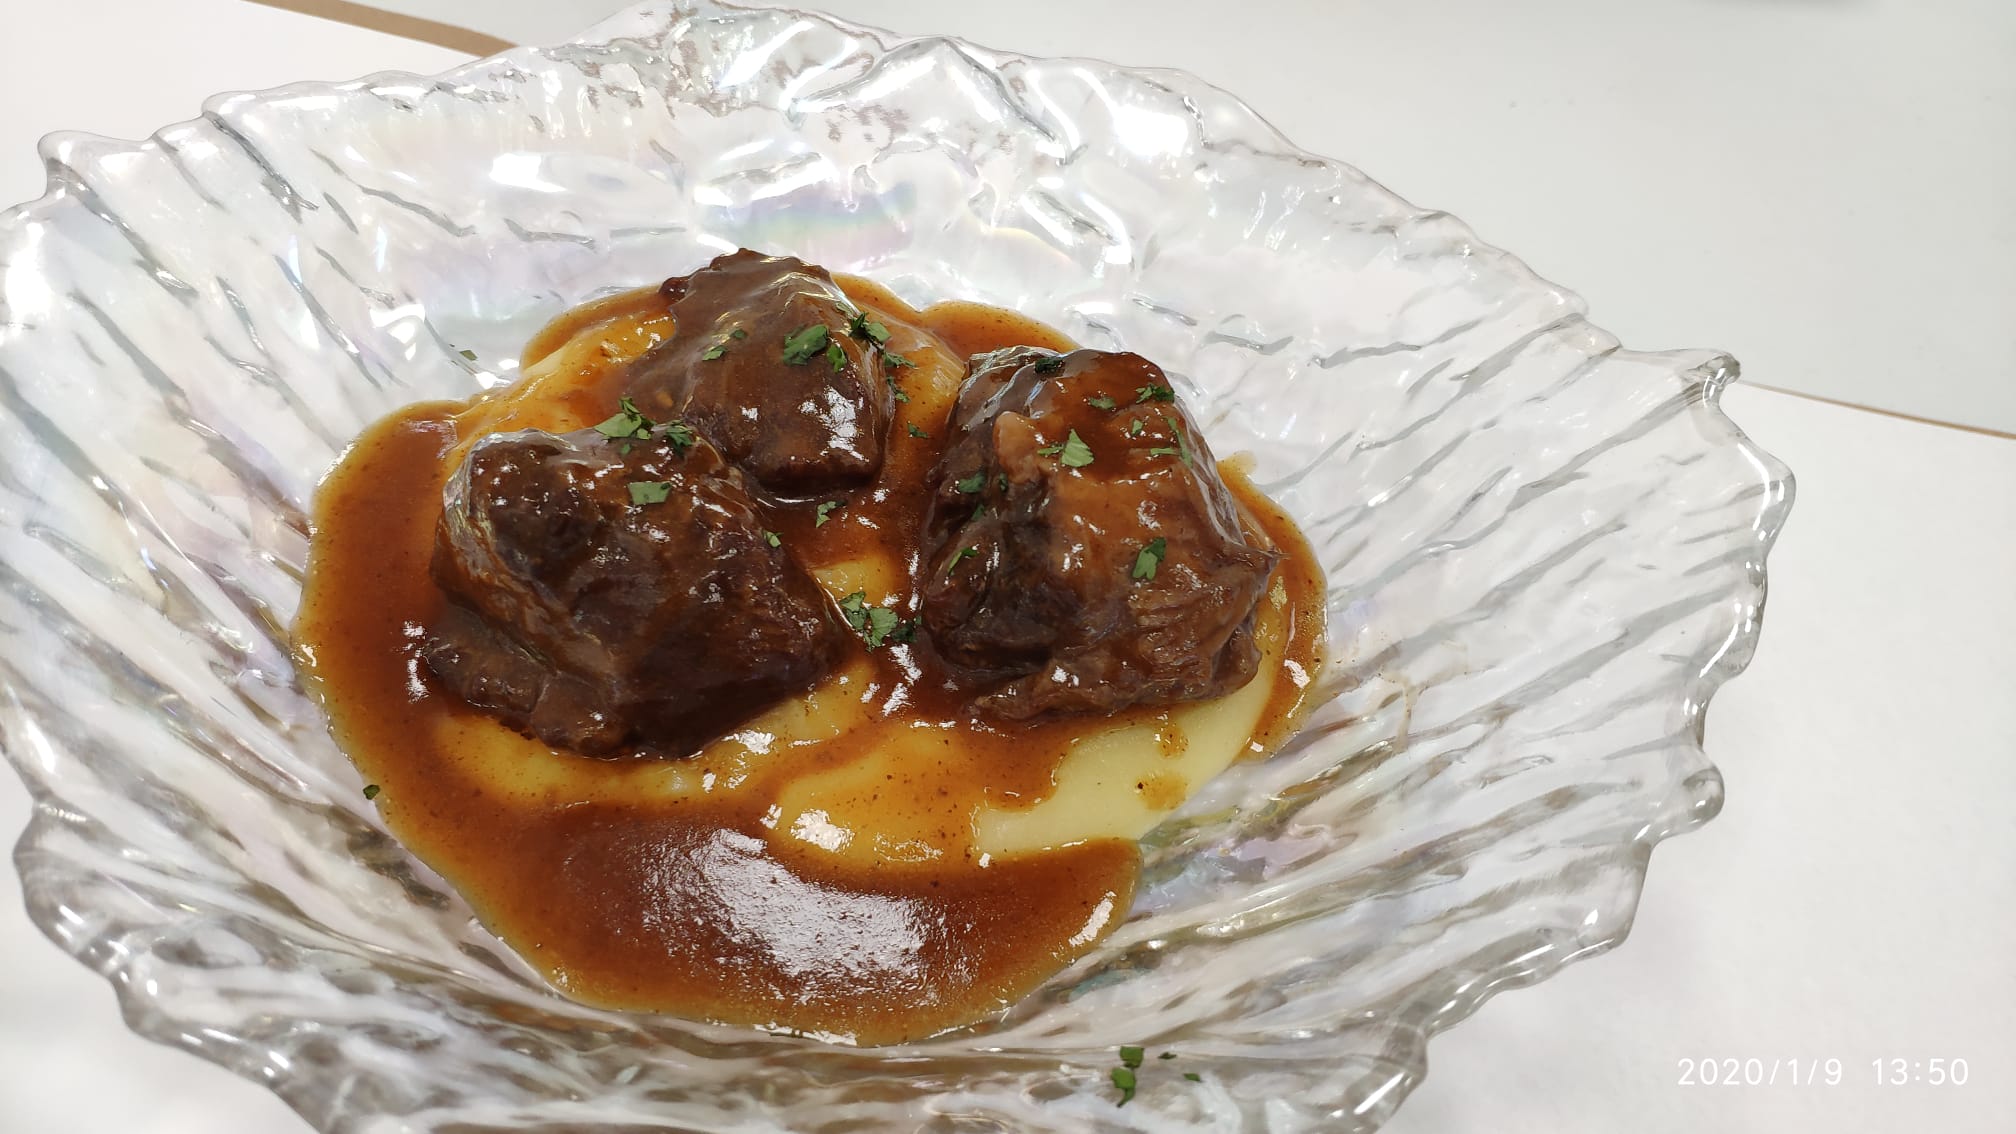 Pork cheeks cooked with red wine